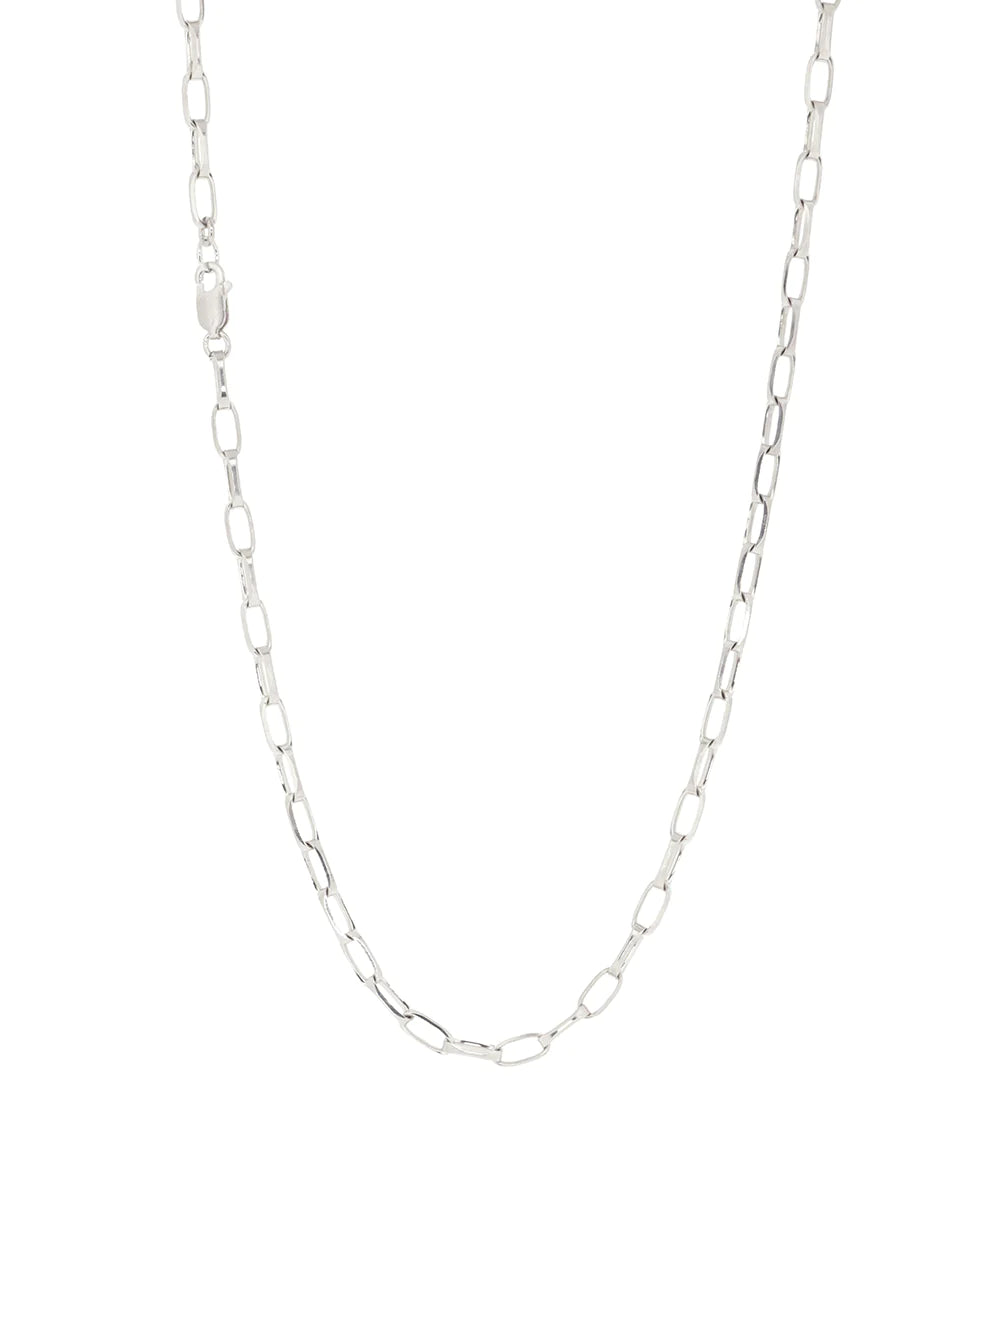 REPEAT long necklace SILVER 925